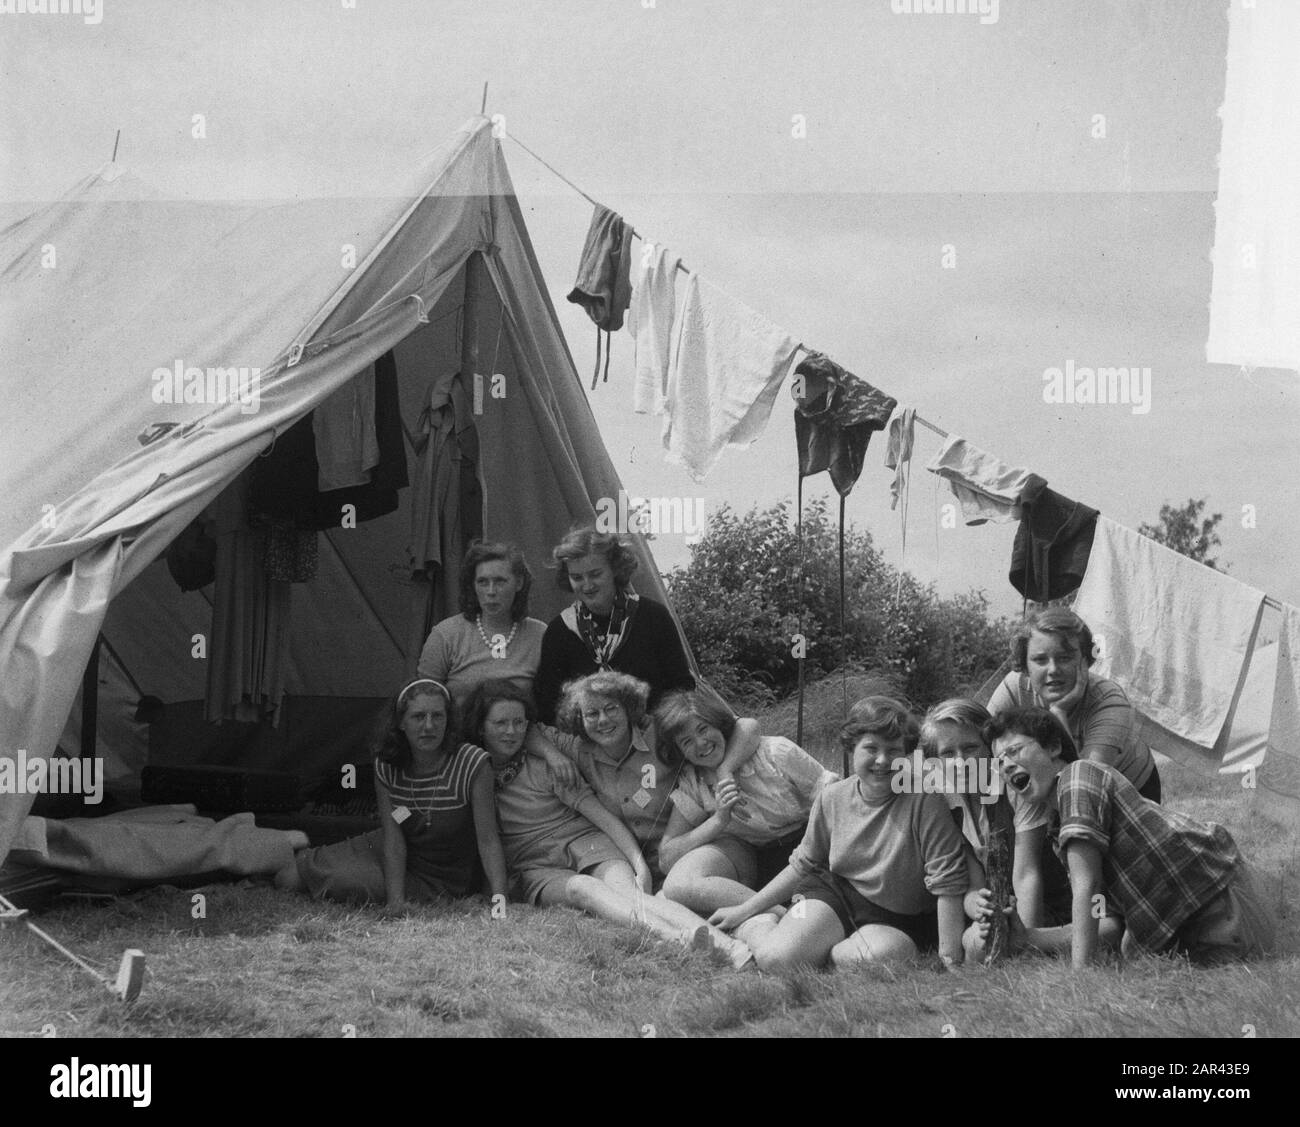 Camps and camping Black and White Stock Photos & Images - Alamy